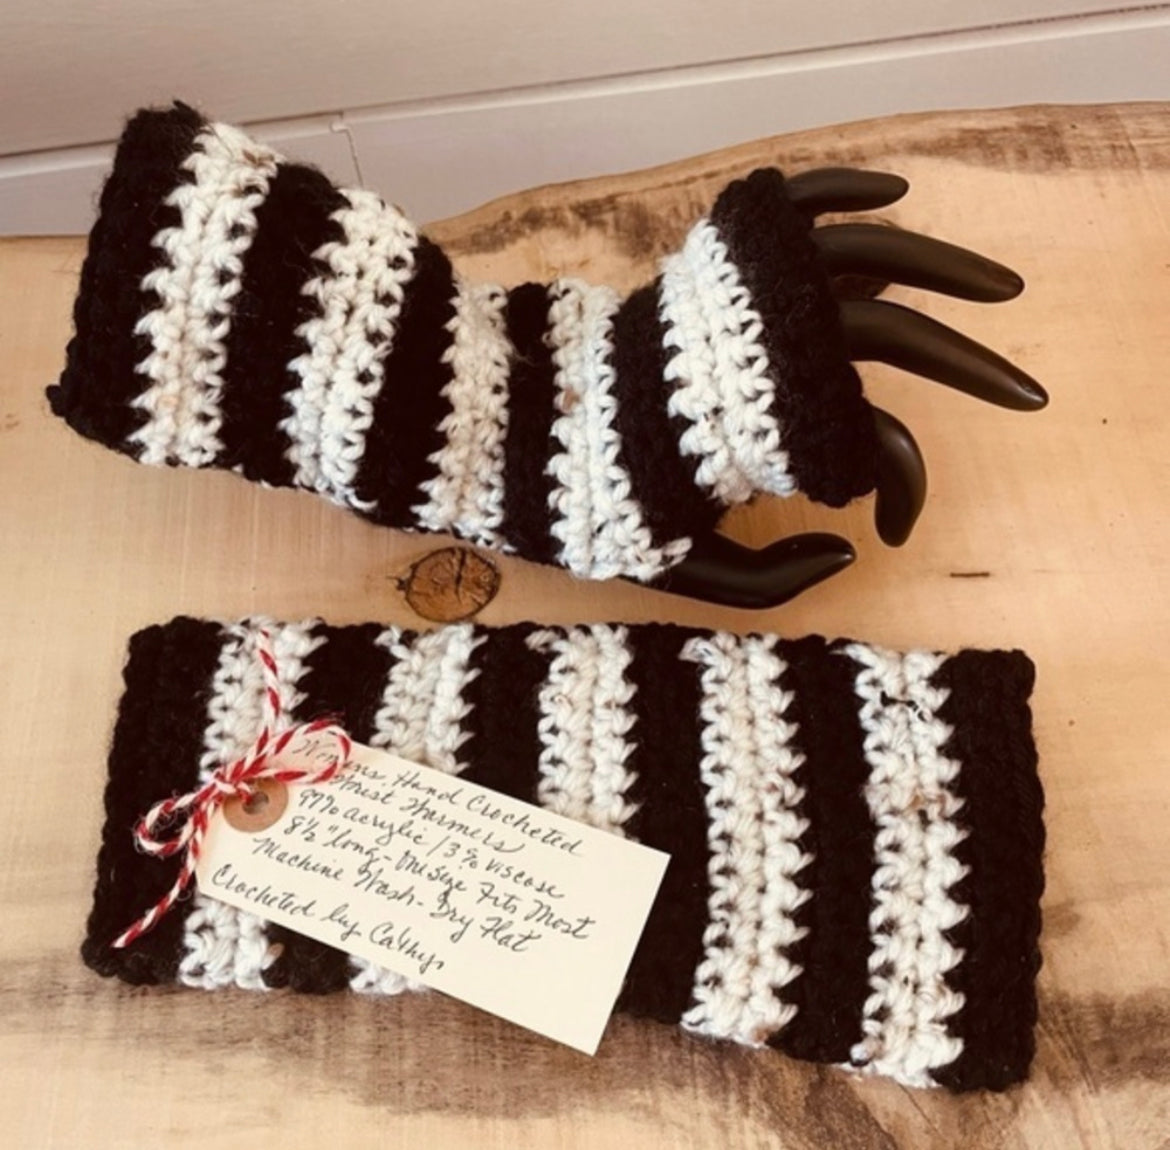 Texting Gaming Fingerless Gloves Striped Black Speckled Cream Crochet Knit Fall Winter Writing Tech Wrist Warmers